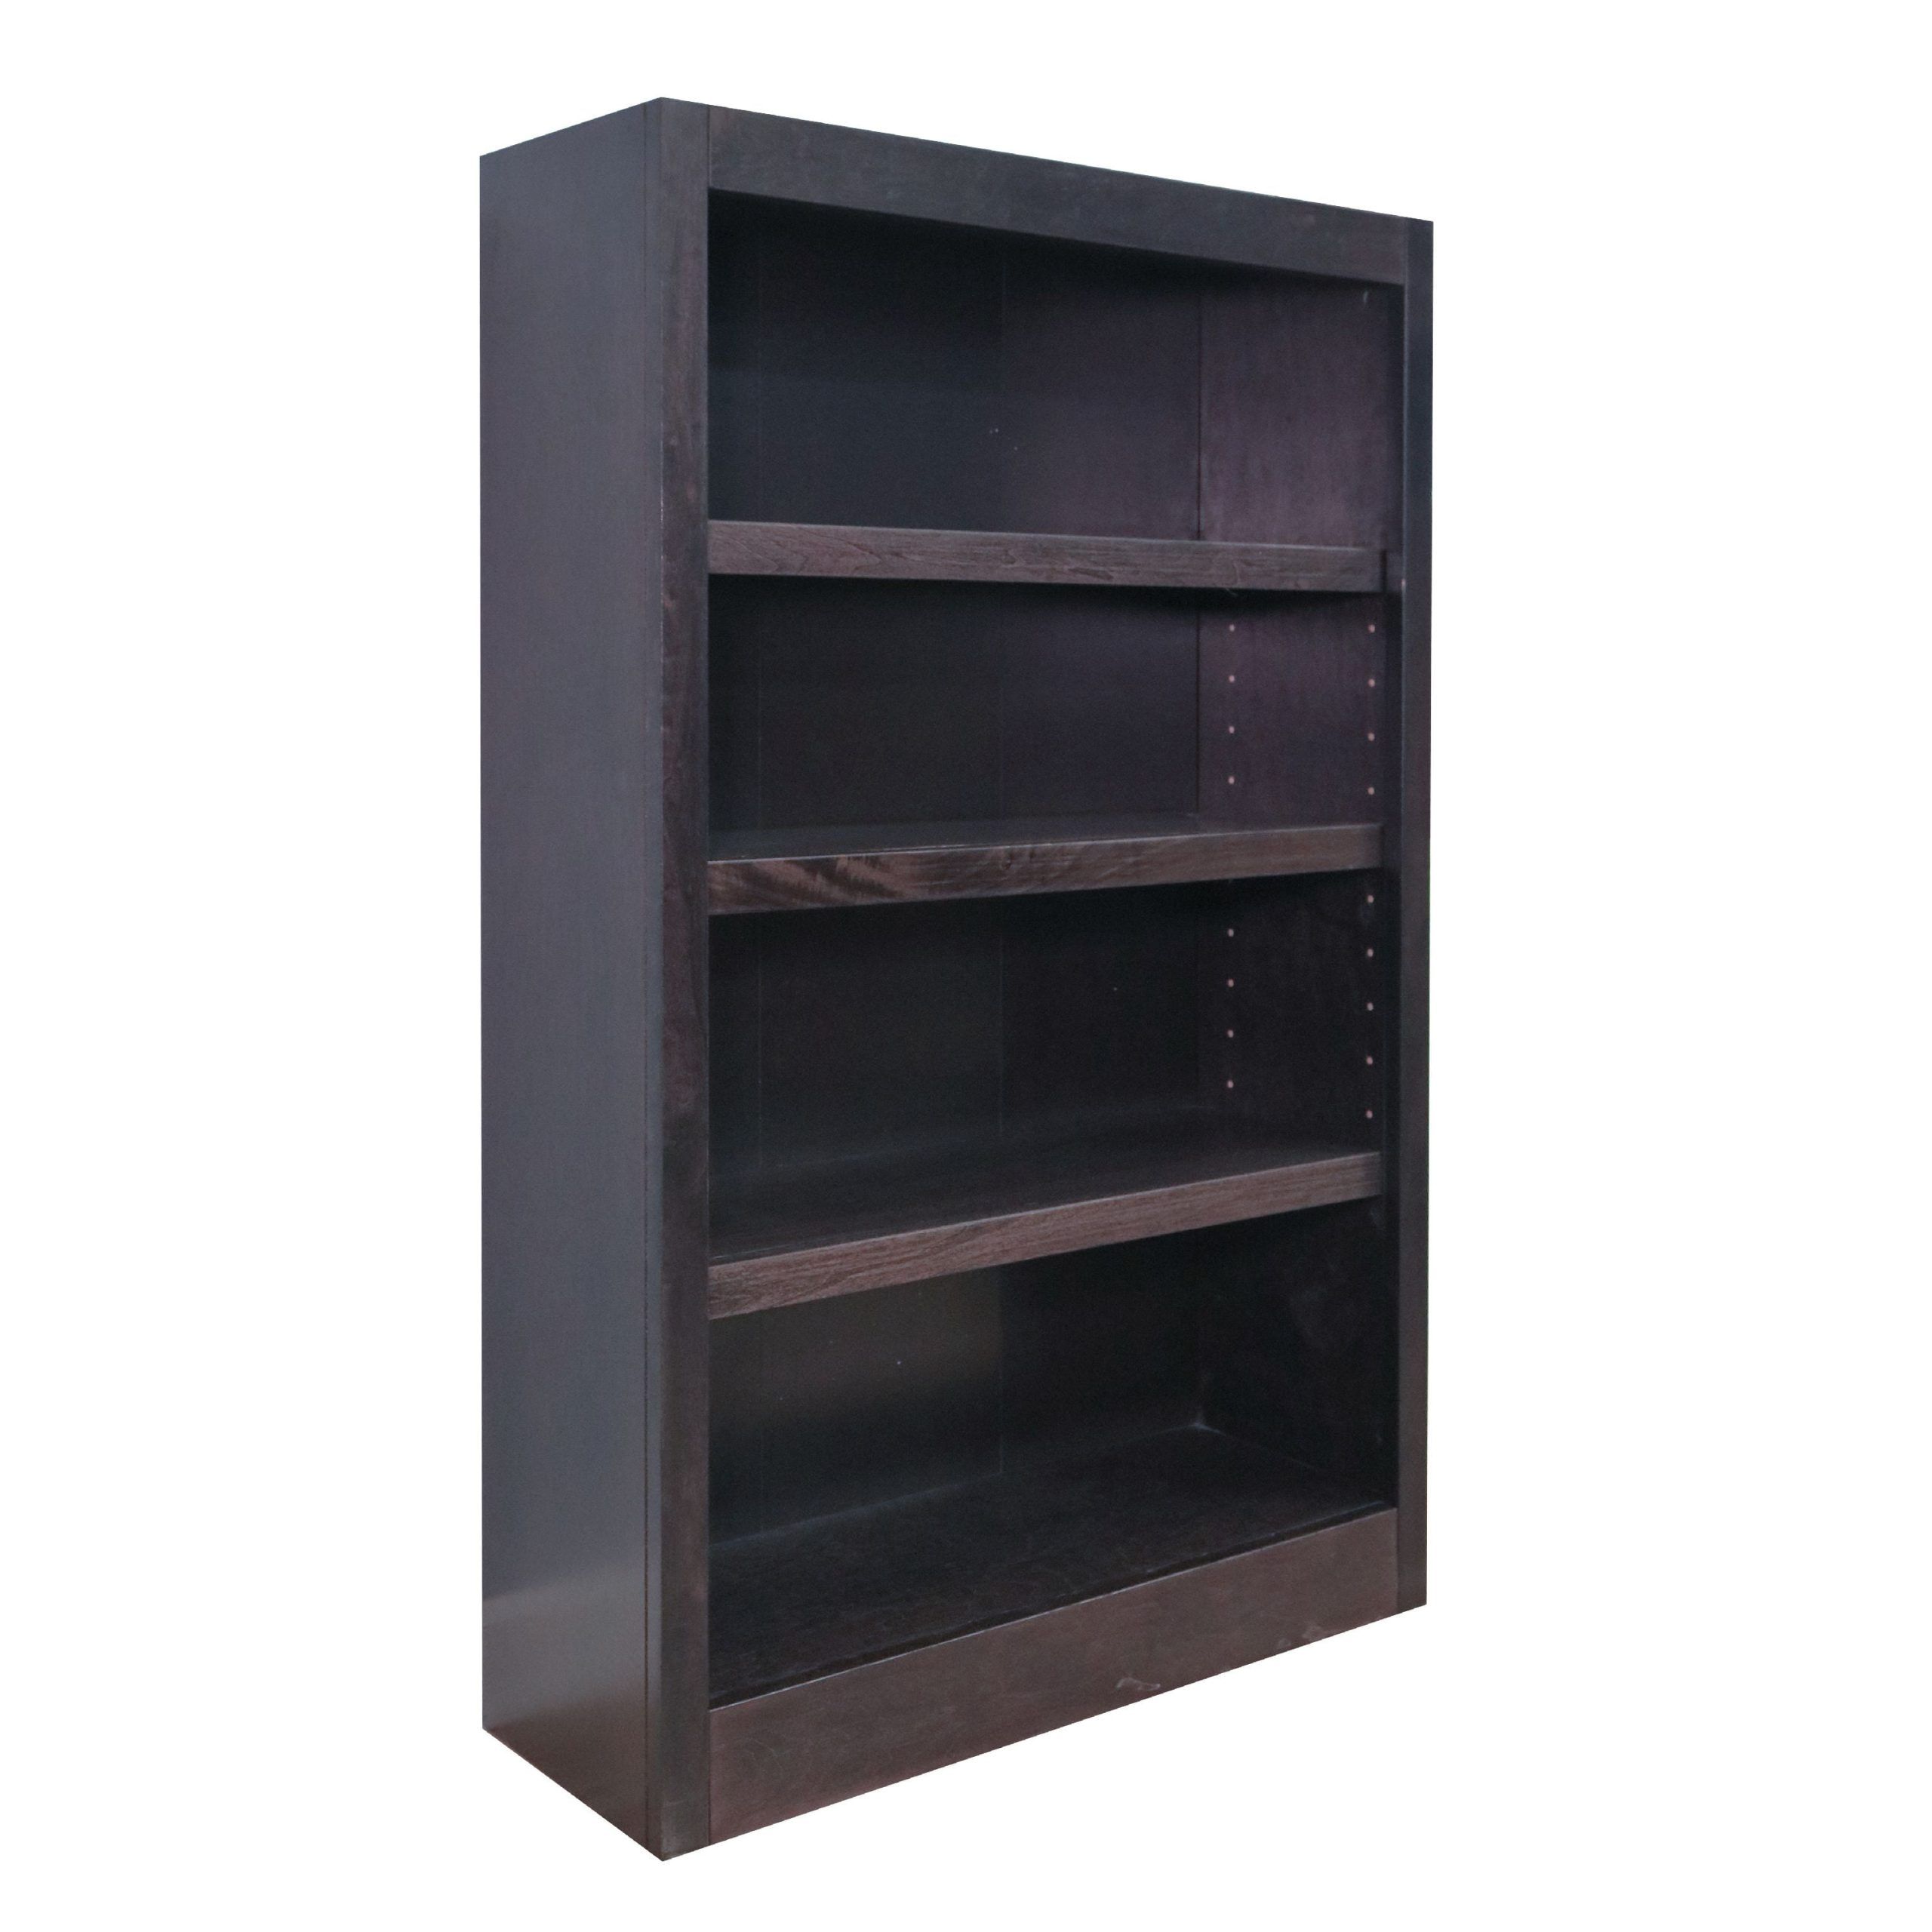 Concepts In Wood 4 Shelf Wood Bookcase, 48 Inch Tall – Espresso Finish –  Walmart Throughout 48 Inch Bookcases (View 11 of 15)